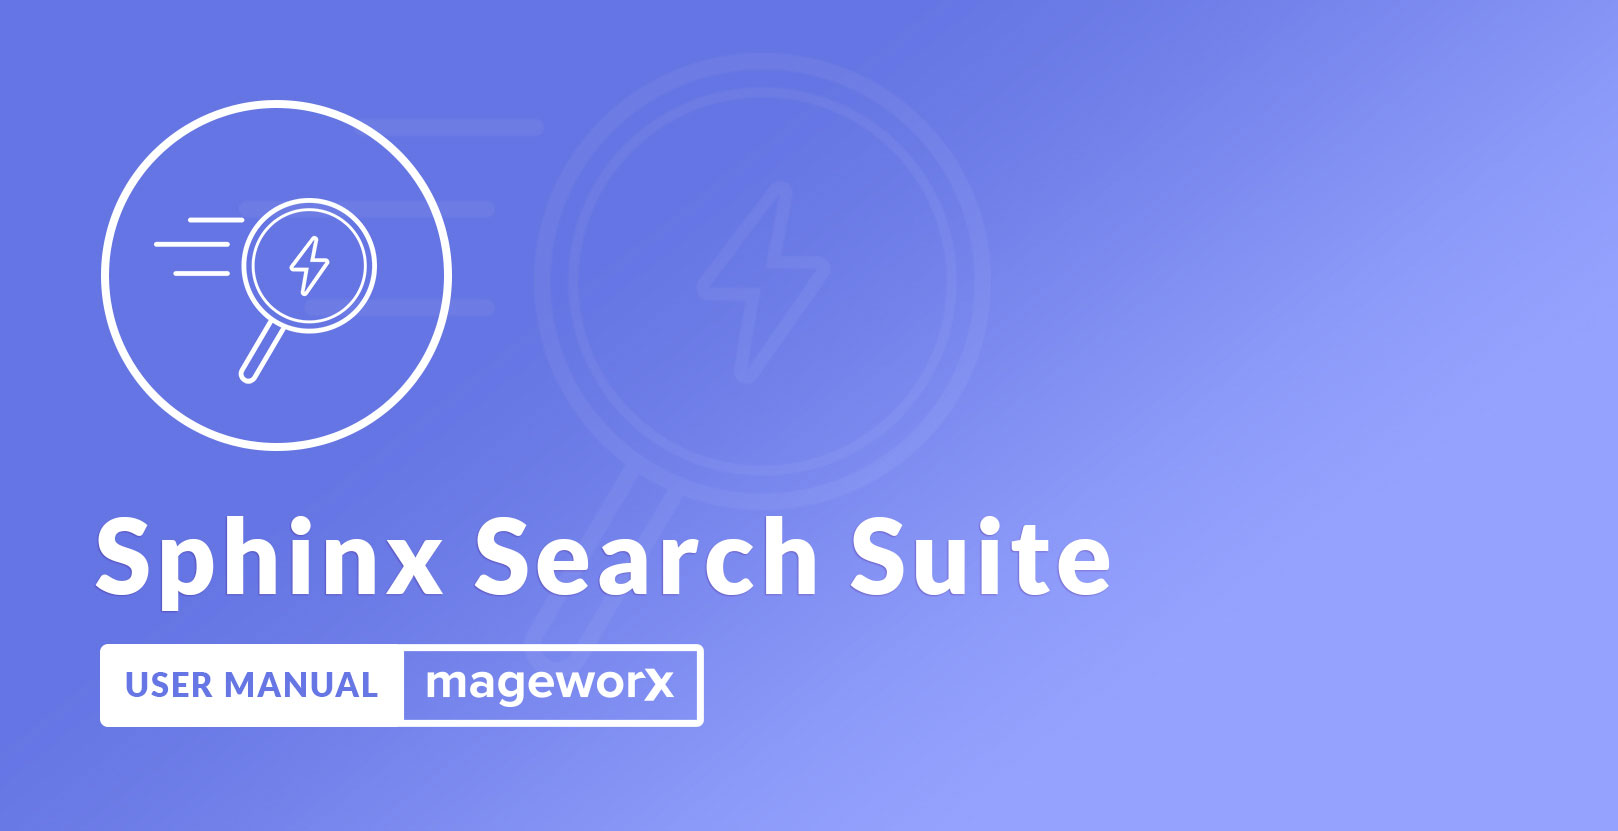 Search Suite